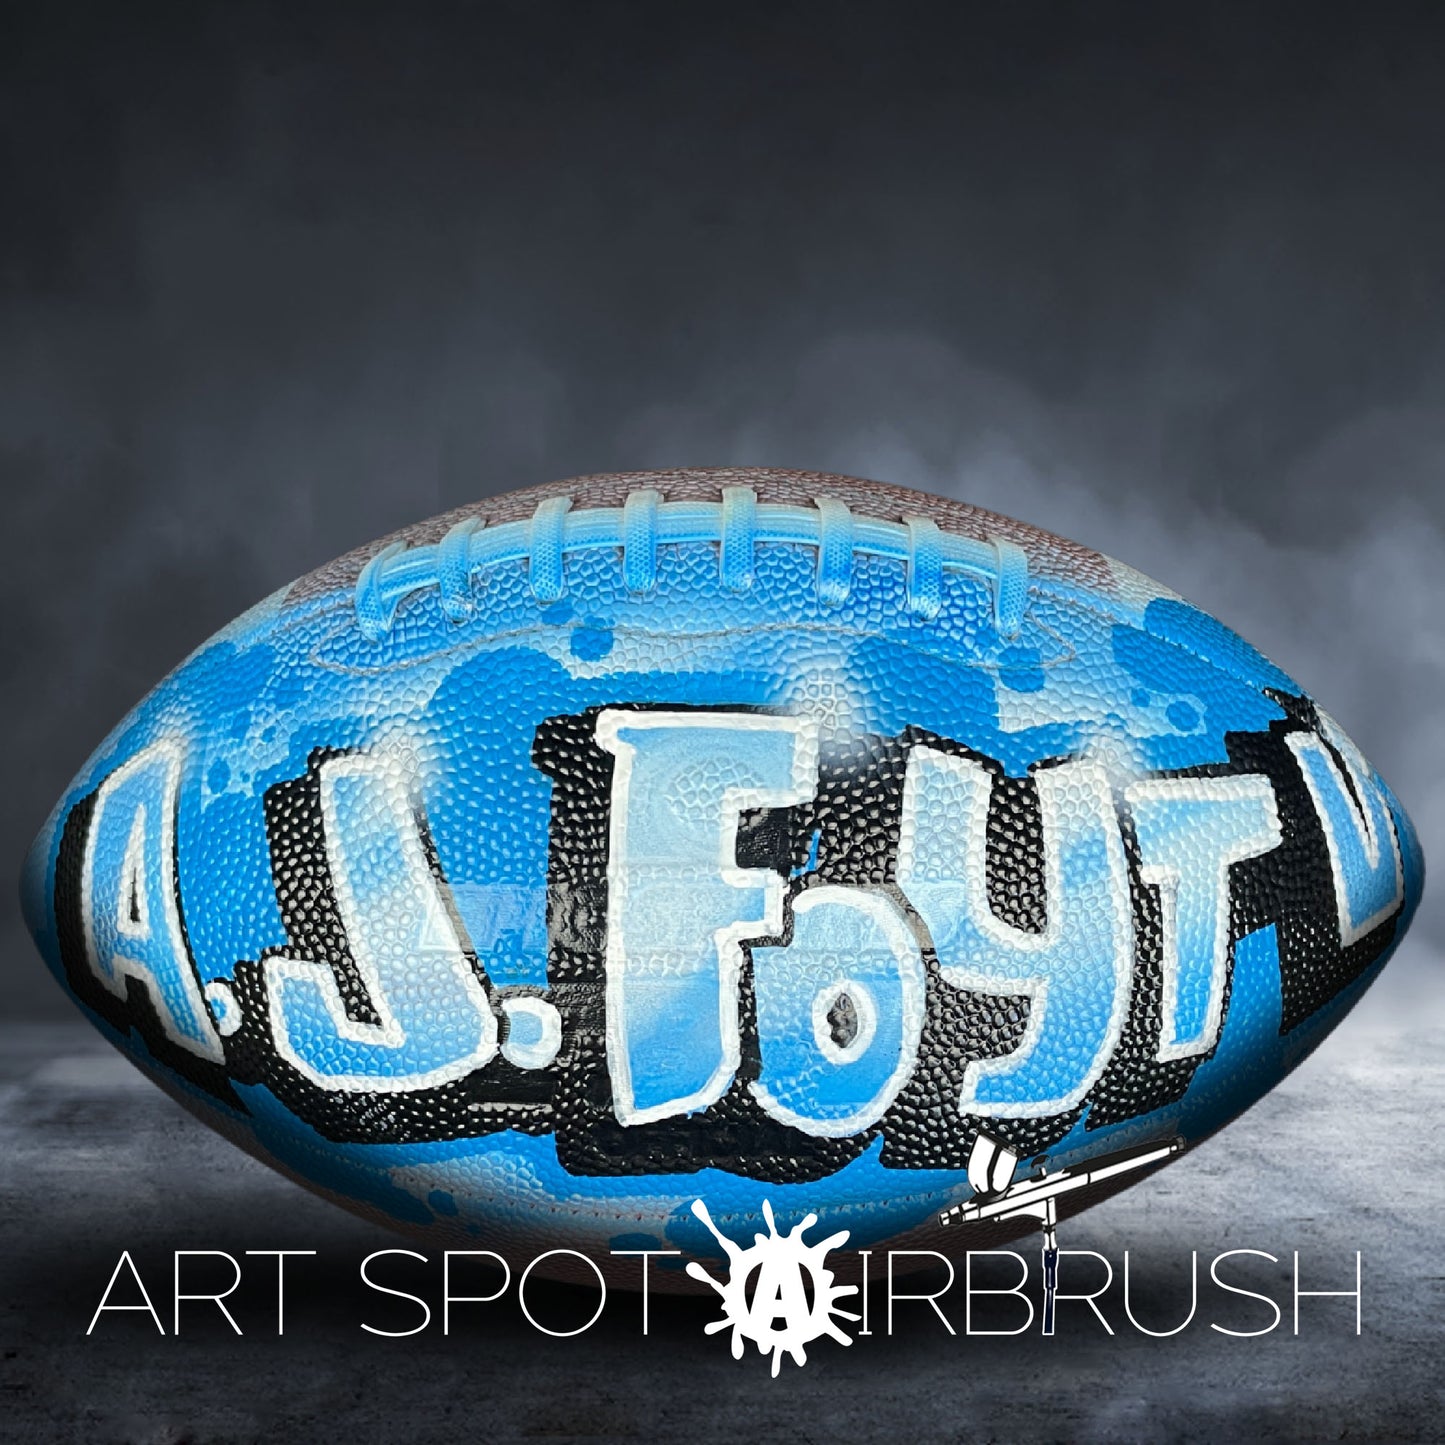 Football Personalized with a Name in Graffiti Style